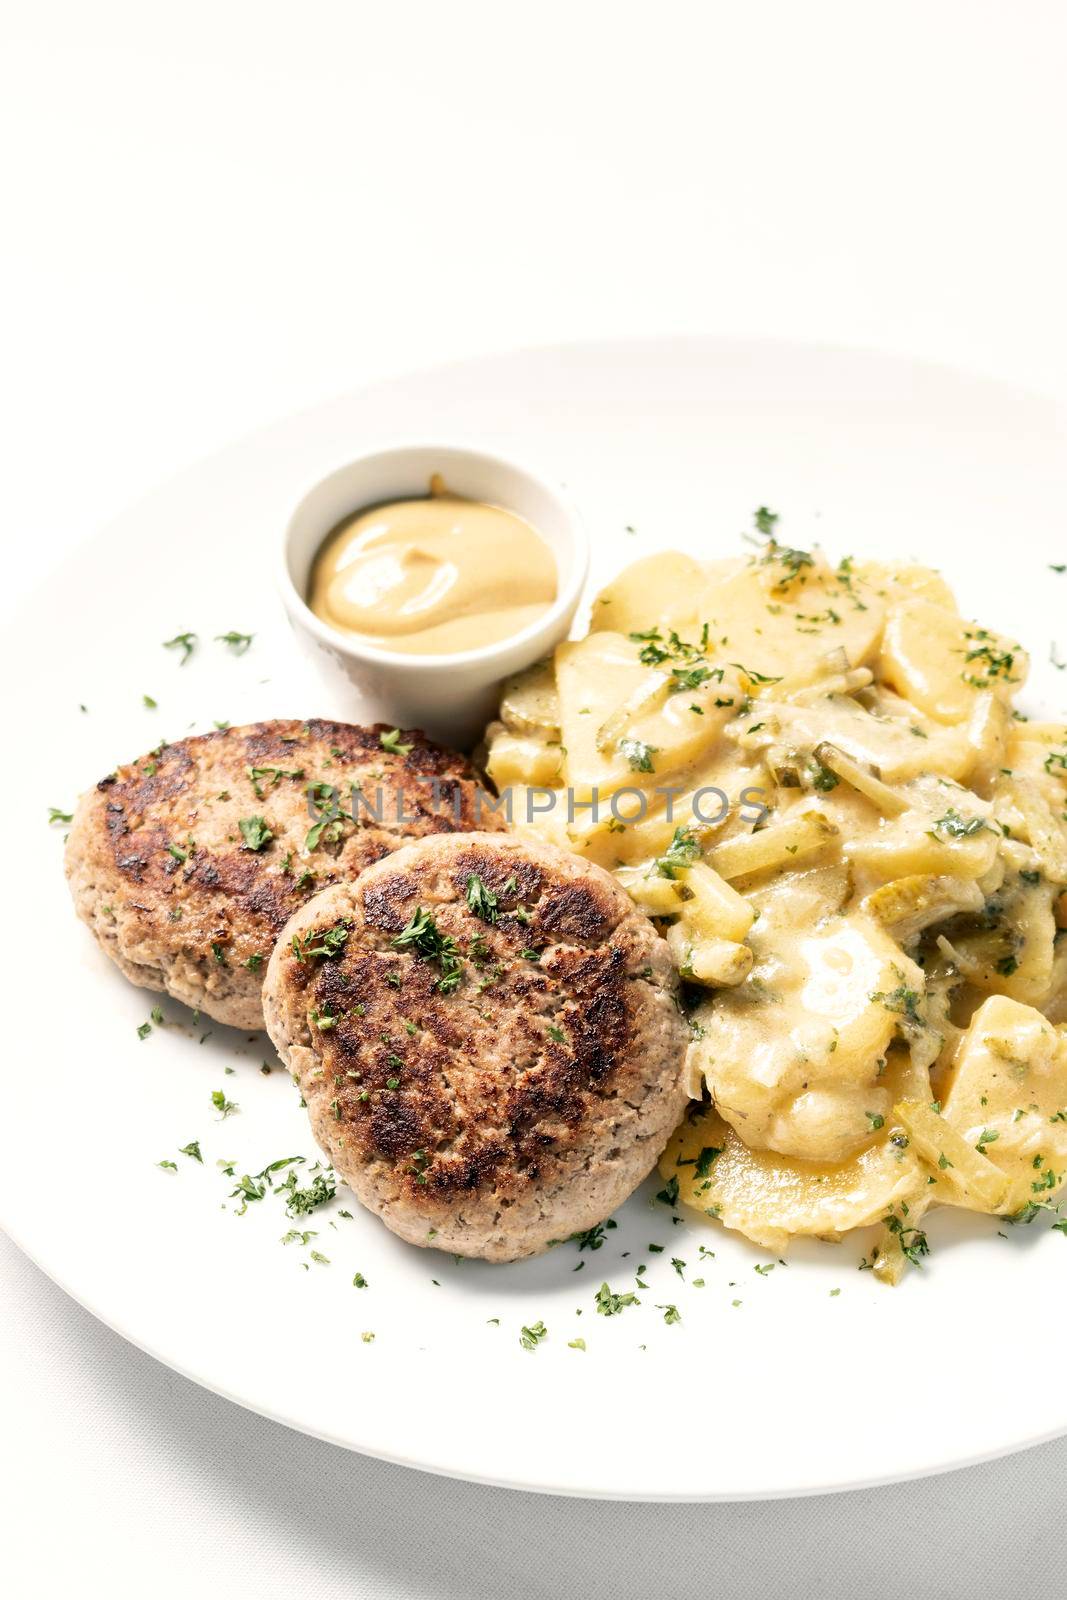 german frikadellen meatballs with creamy onion fried potatoes and mustard sauce on white background